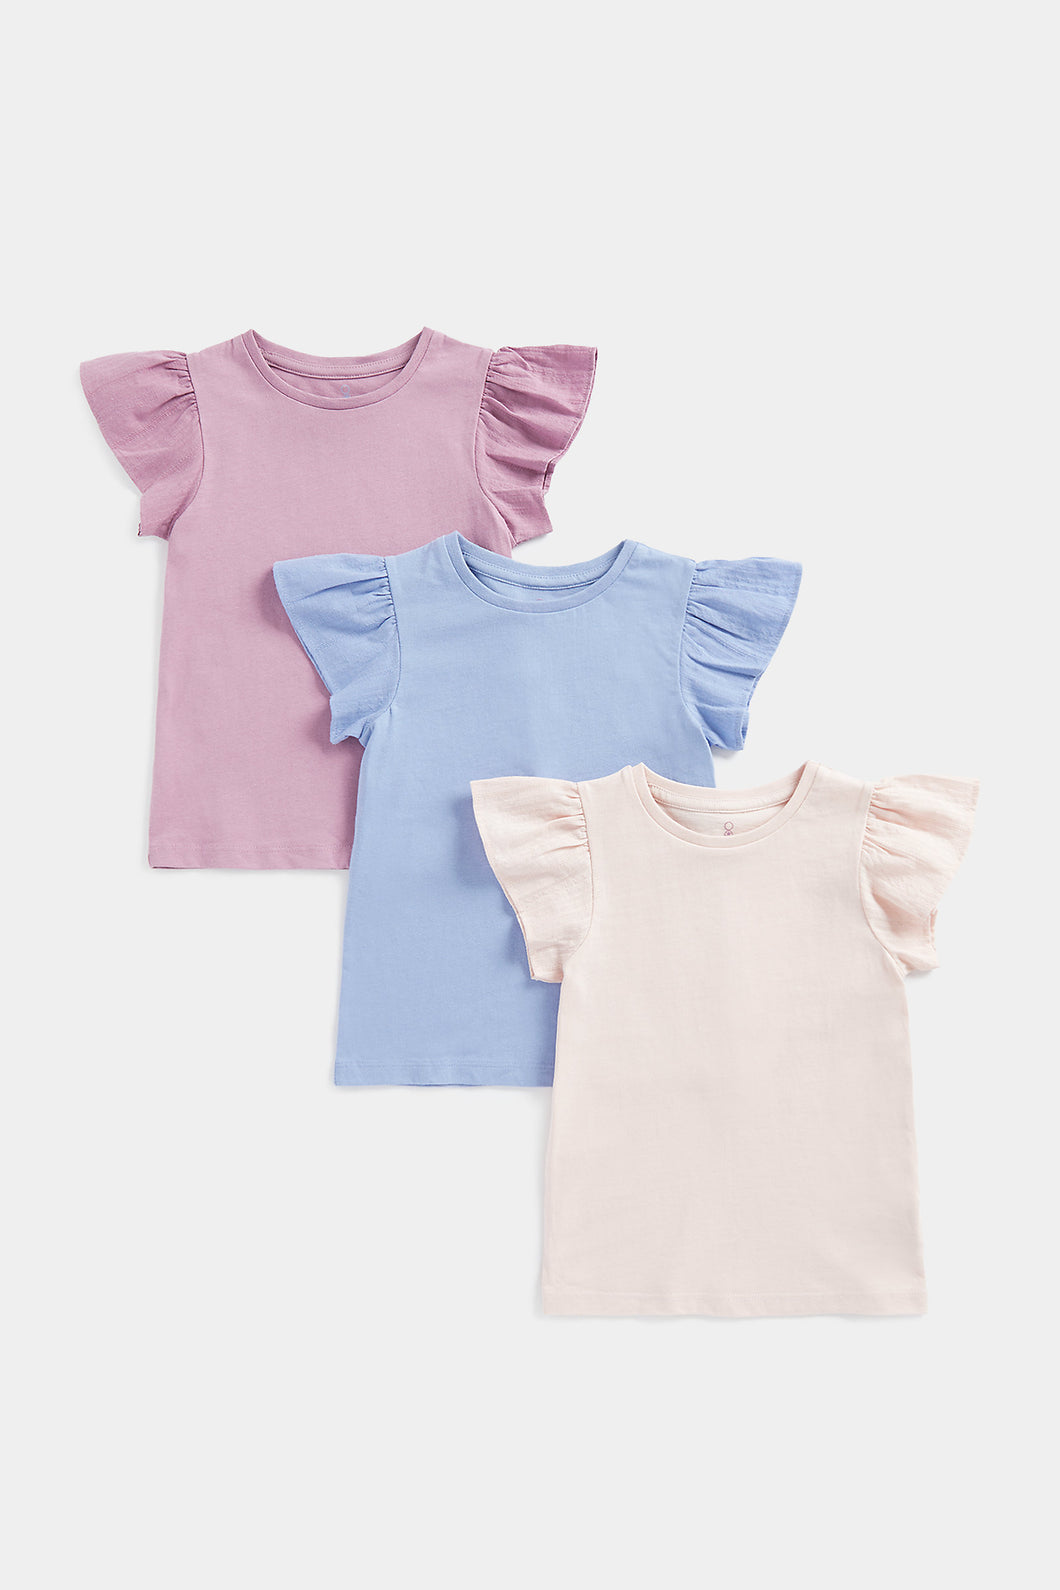 Mothercare Pink and Blue T-Shirts - 3 Pack